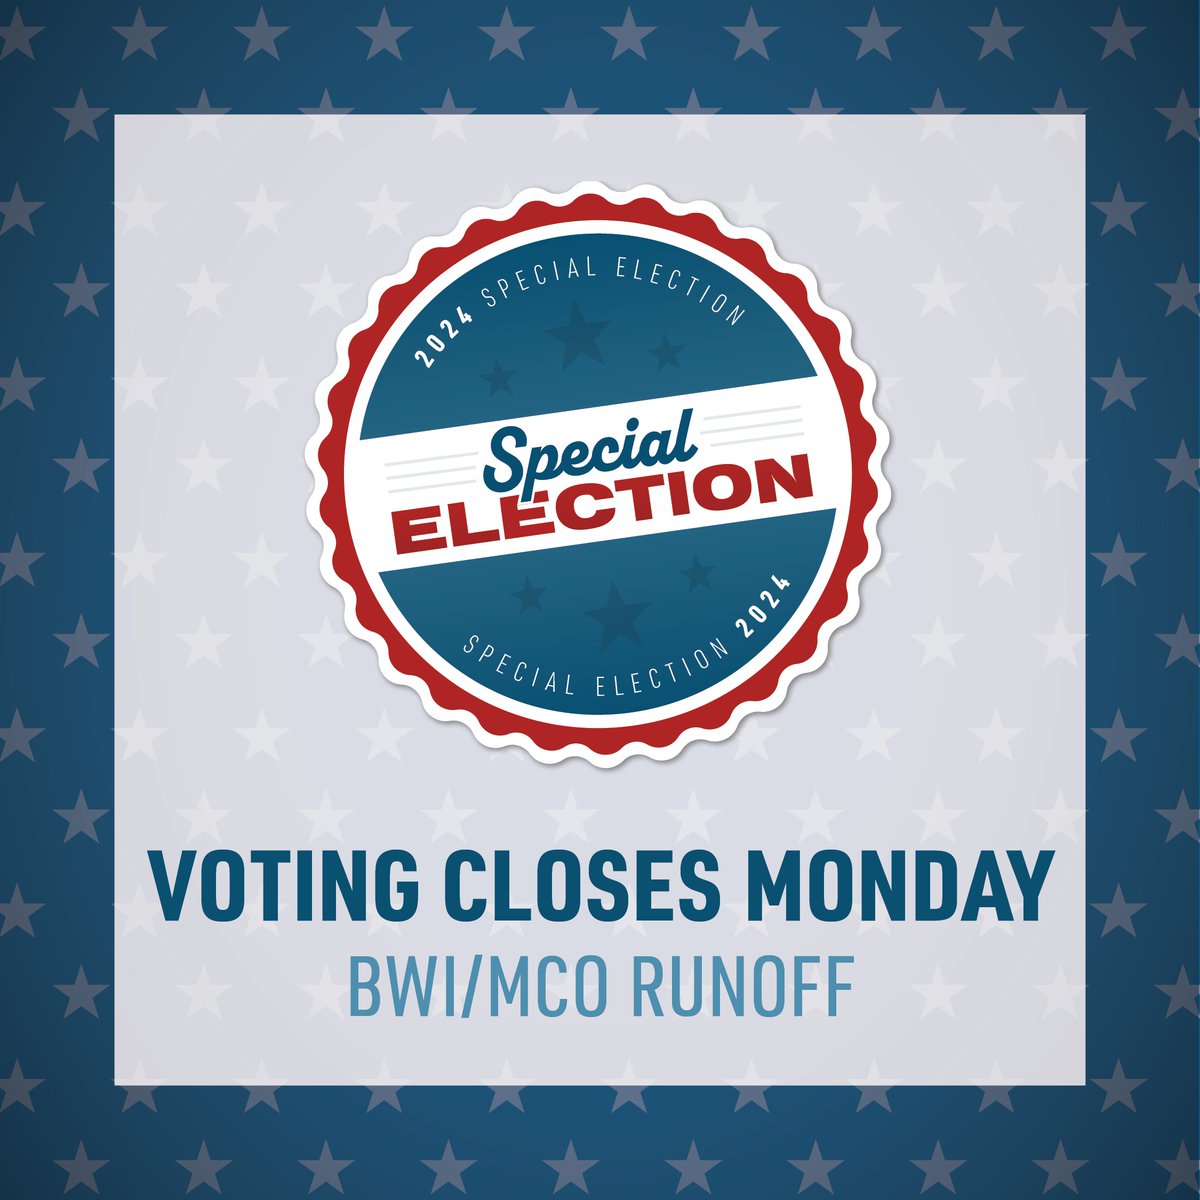 Voting for BWI and MCO's runoff election closes Monday, April 22, at 1200 CT. If you've yet to cast your vote, visit swapa.org for information about your candidates and how to vote.